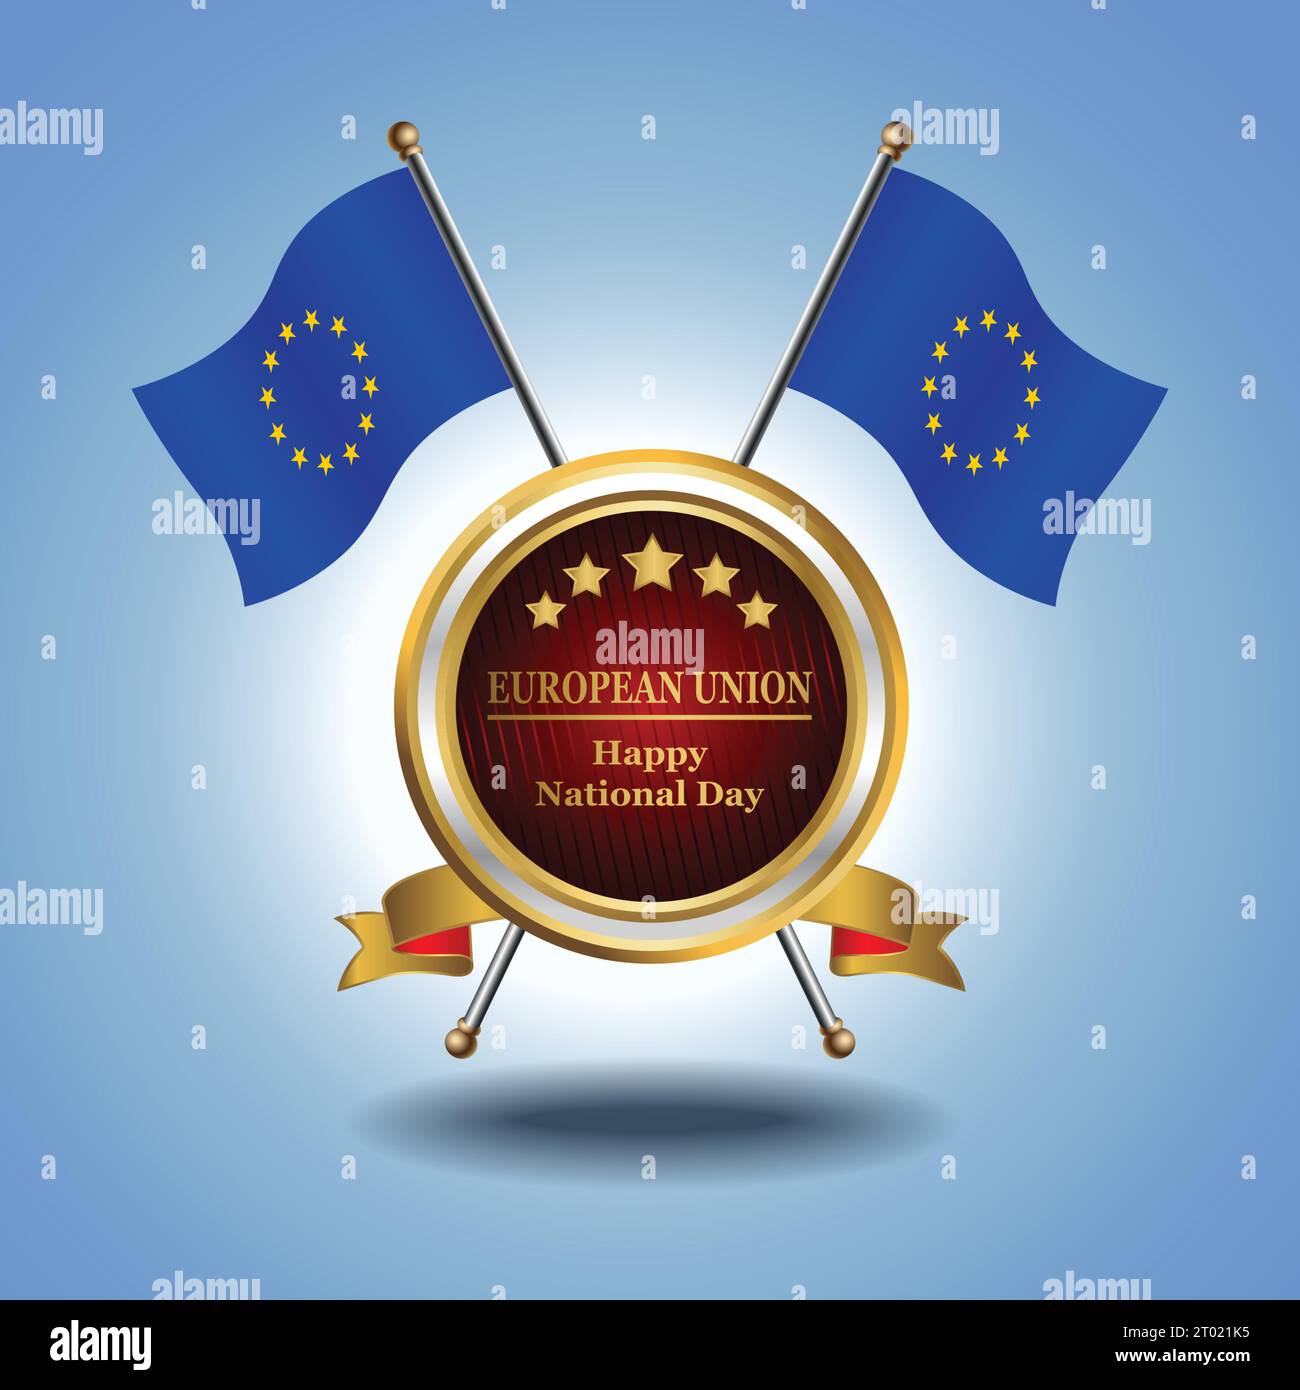 Small National flag of  European Union on Circle With garadasi blue background Stock Vector